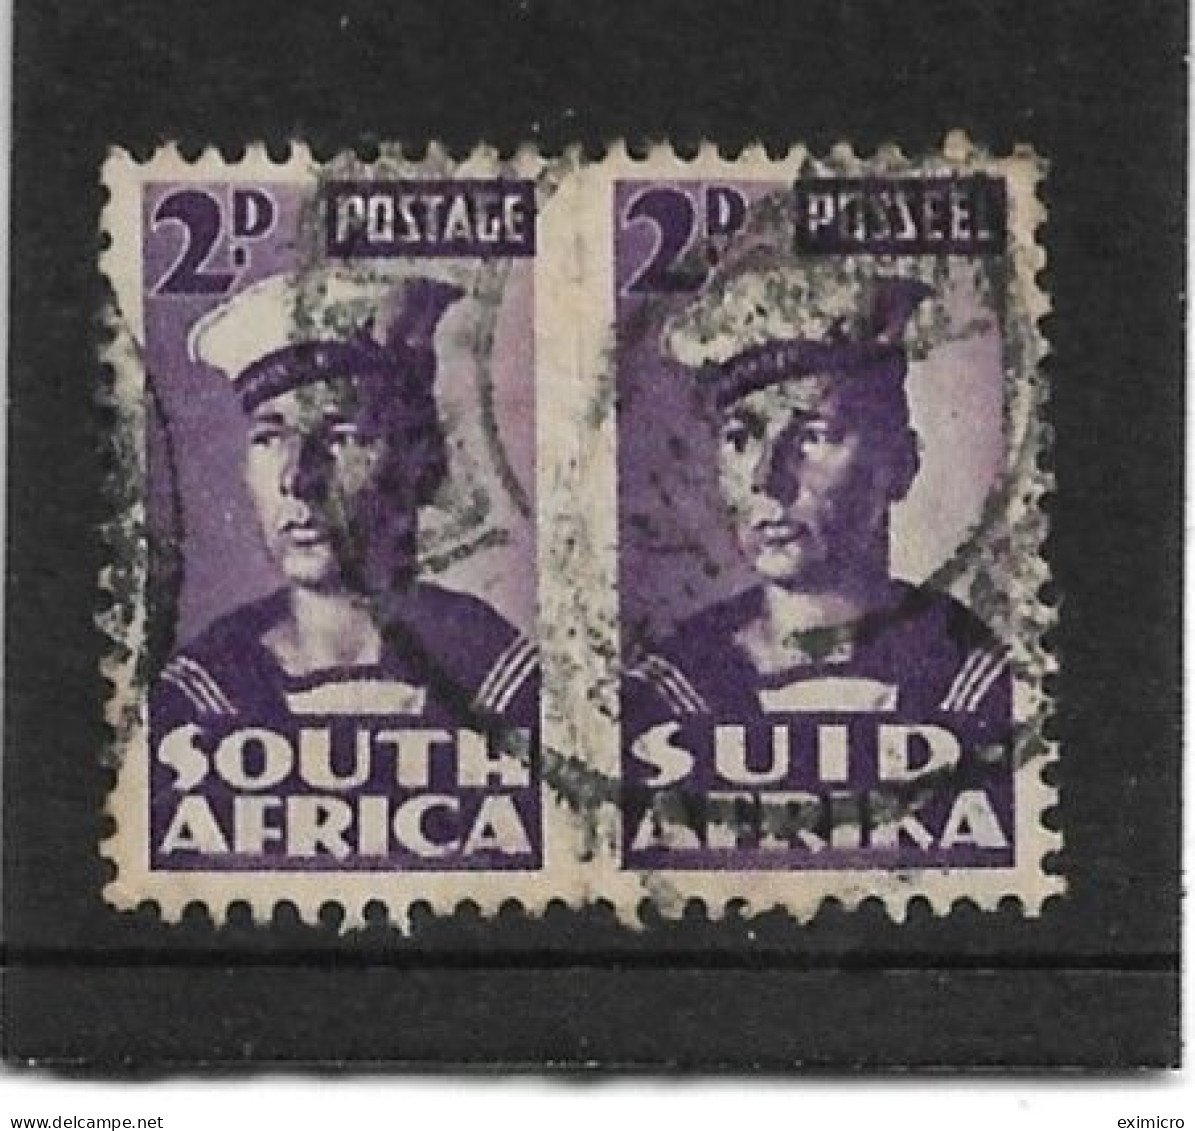 SOUTH AFRICA 1943 2d VIOLET SG 100 FINE USED Cat £2.50 - Used Stamps